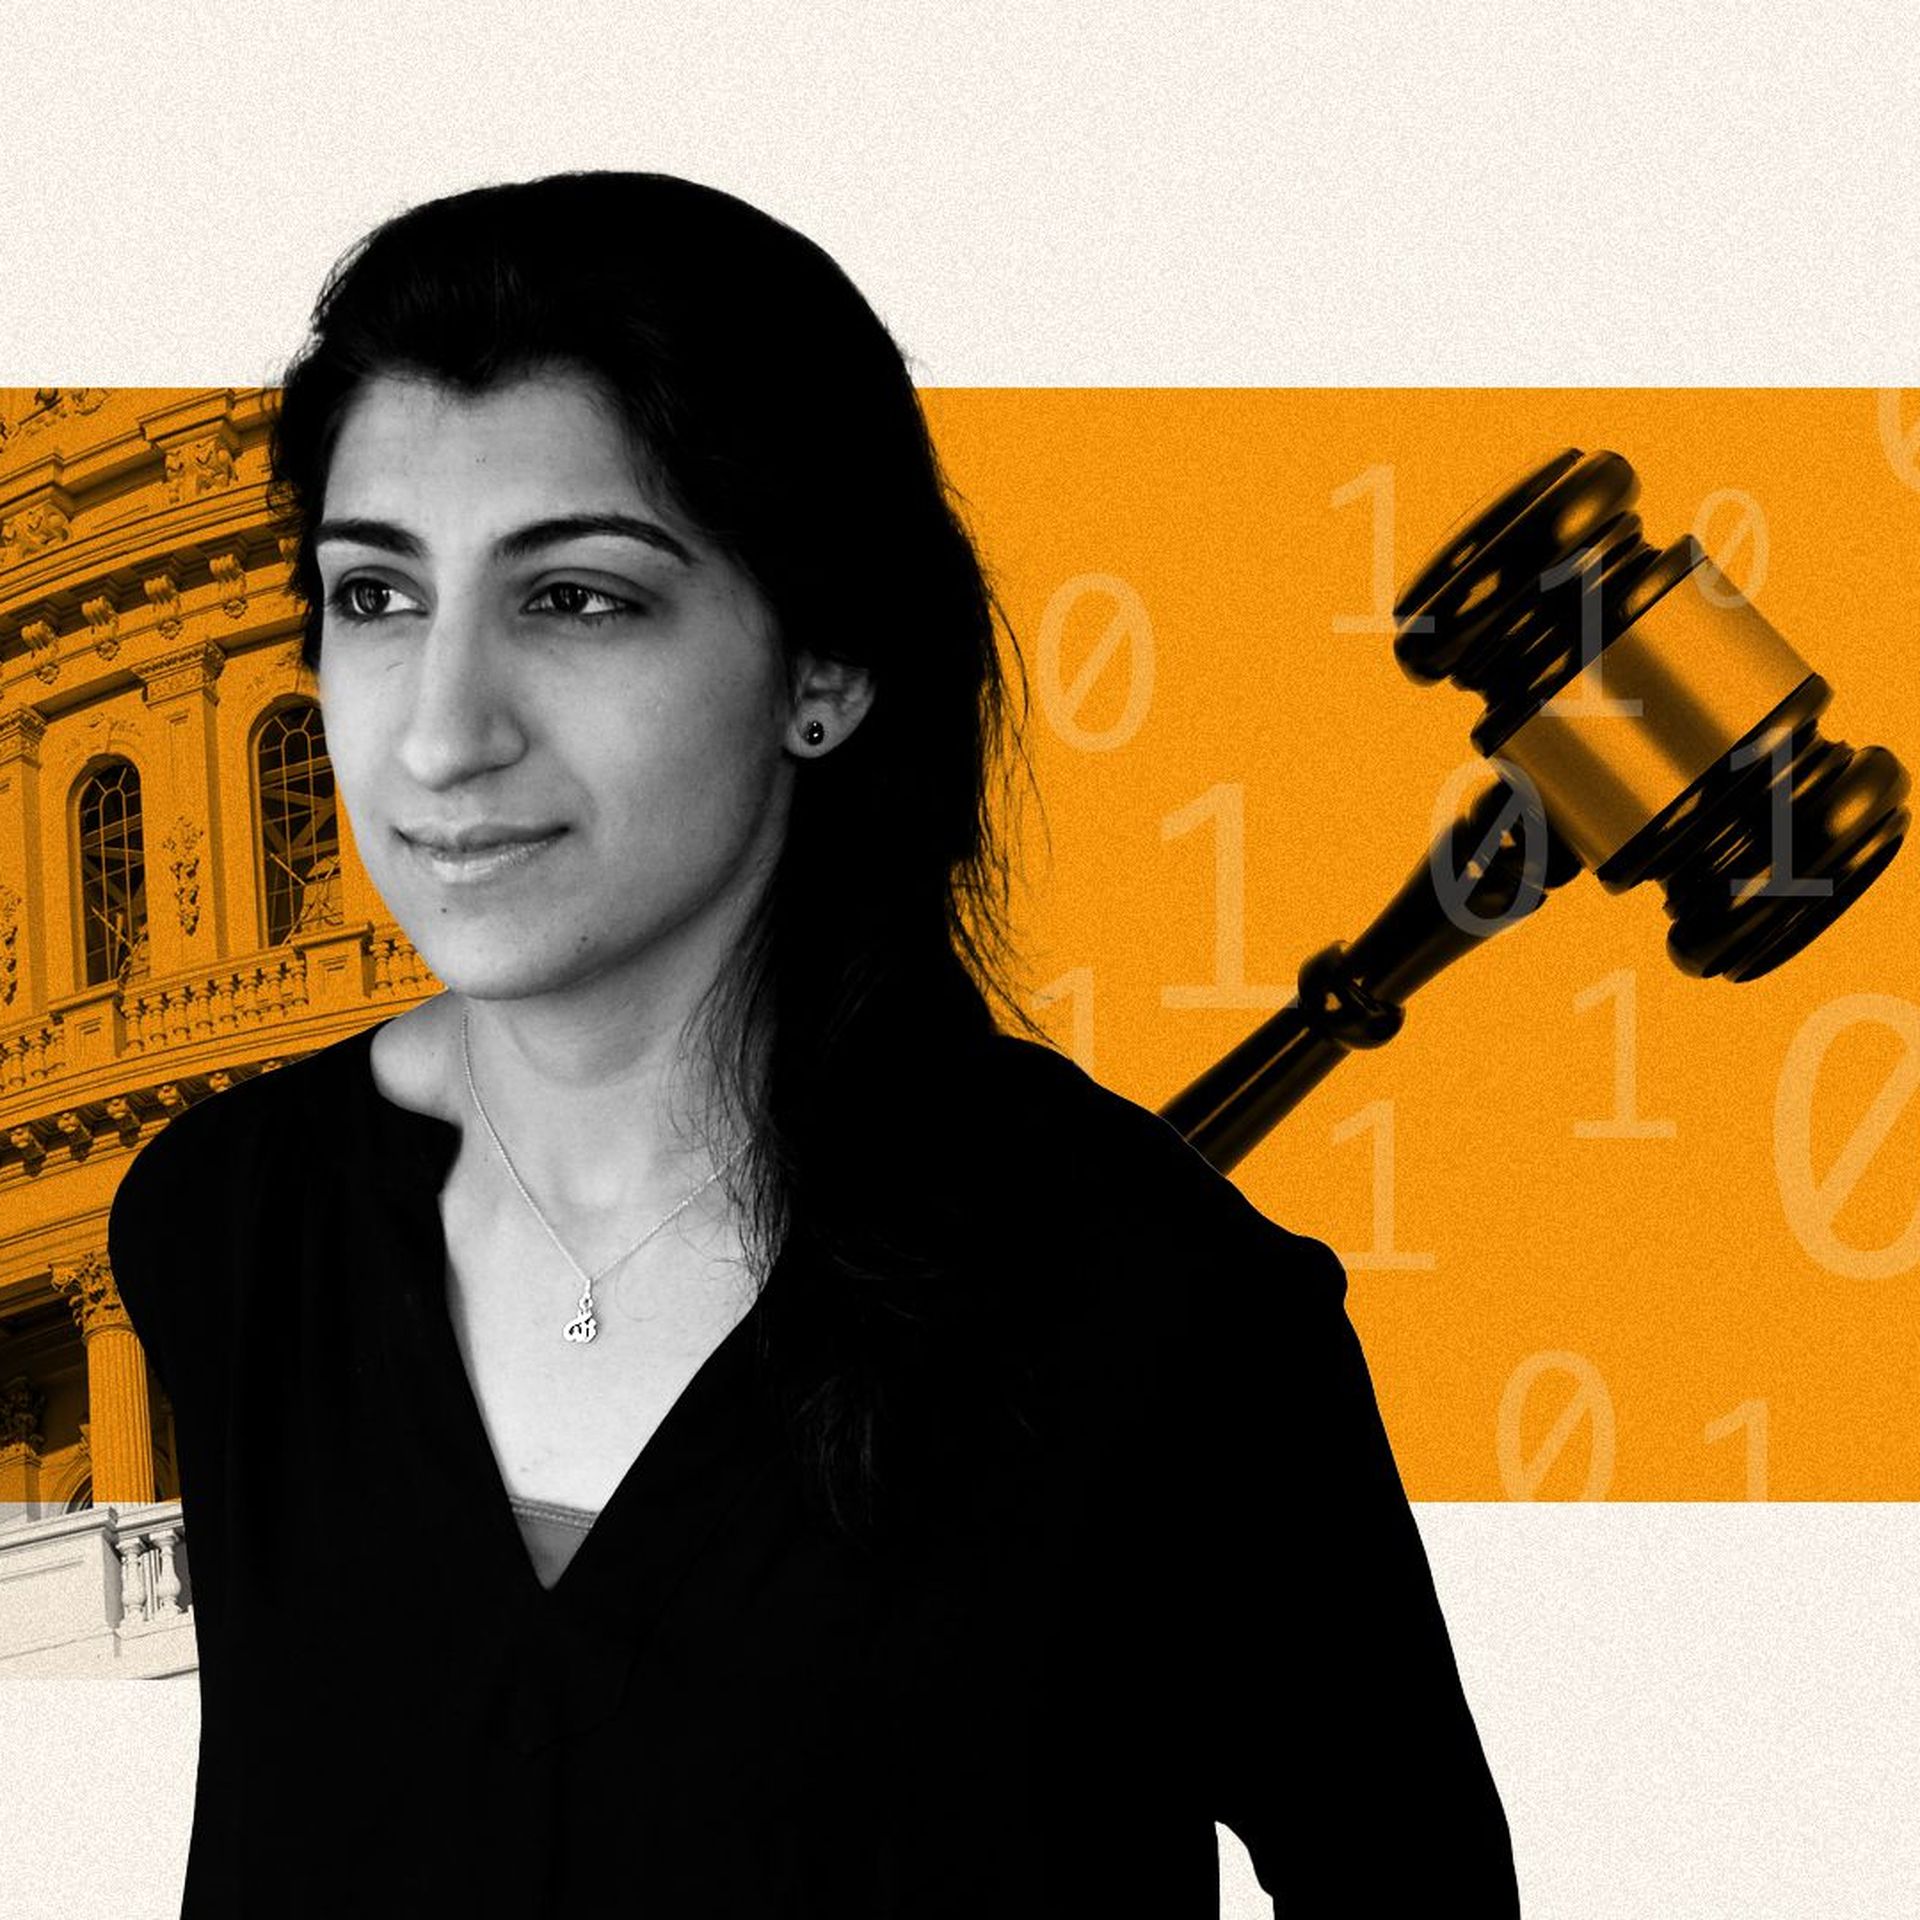 Photo illustration of Lina Khan with the Capitol Building, a gavel, and binary code